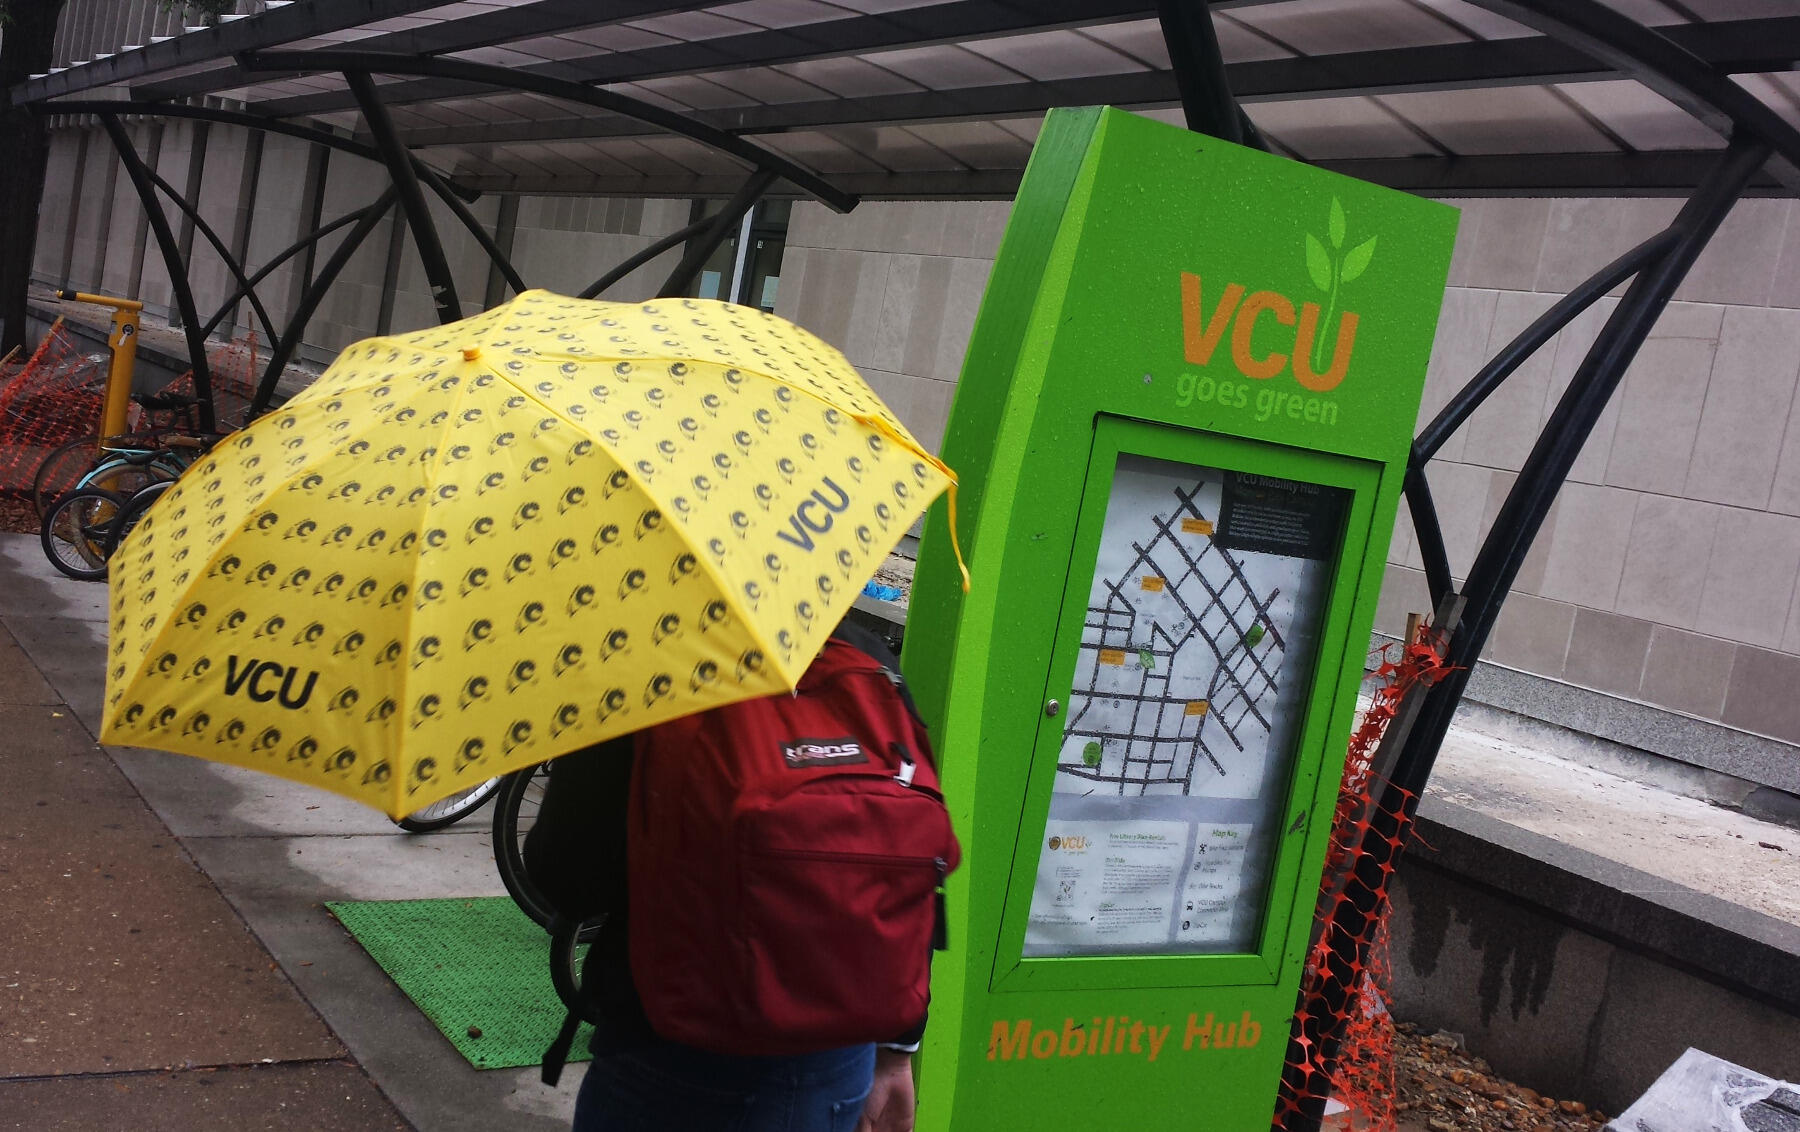 A VCU Mobility Hub near the James Branch Cabell Library, which features covered bike parking.